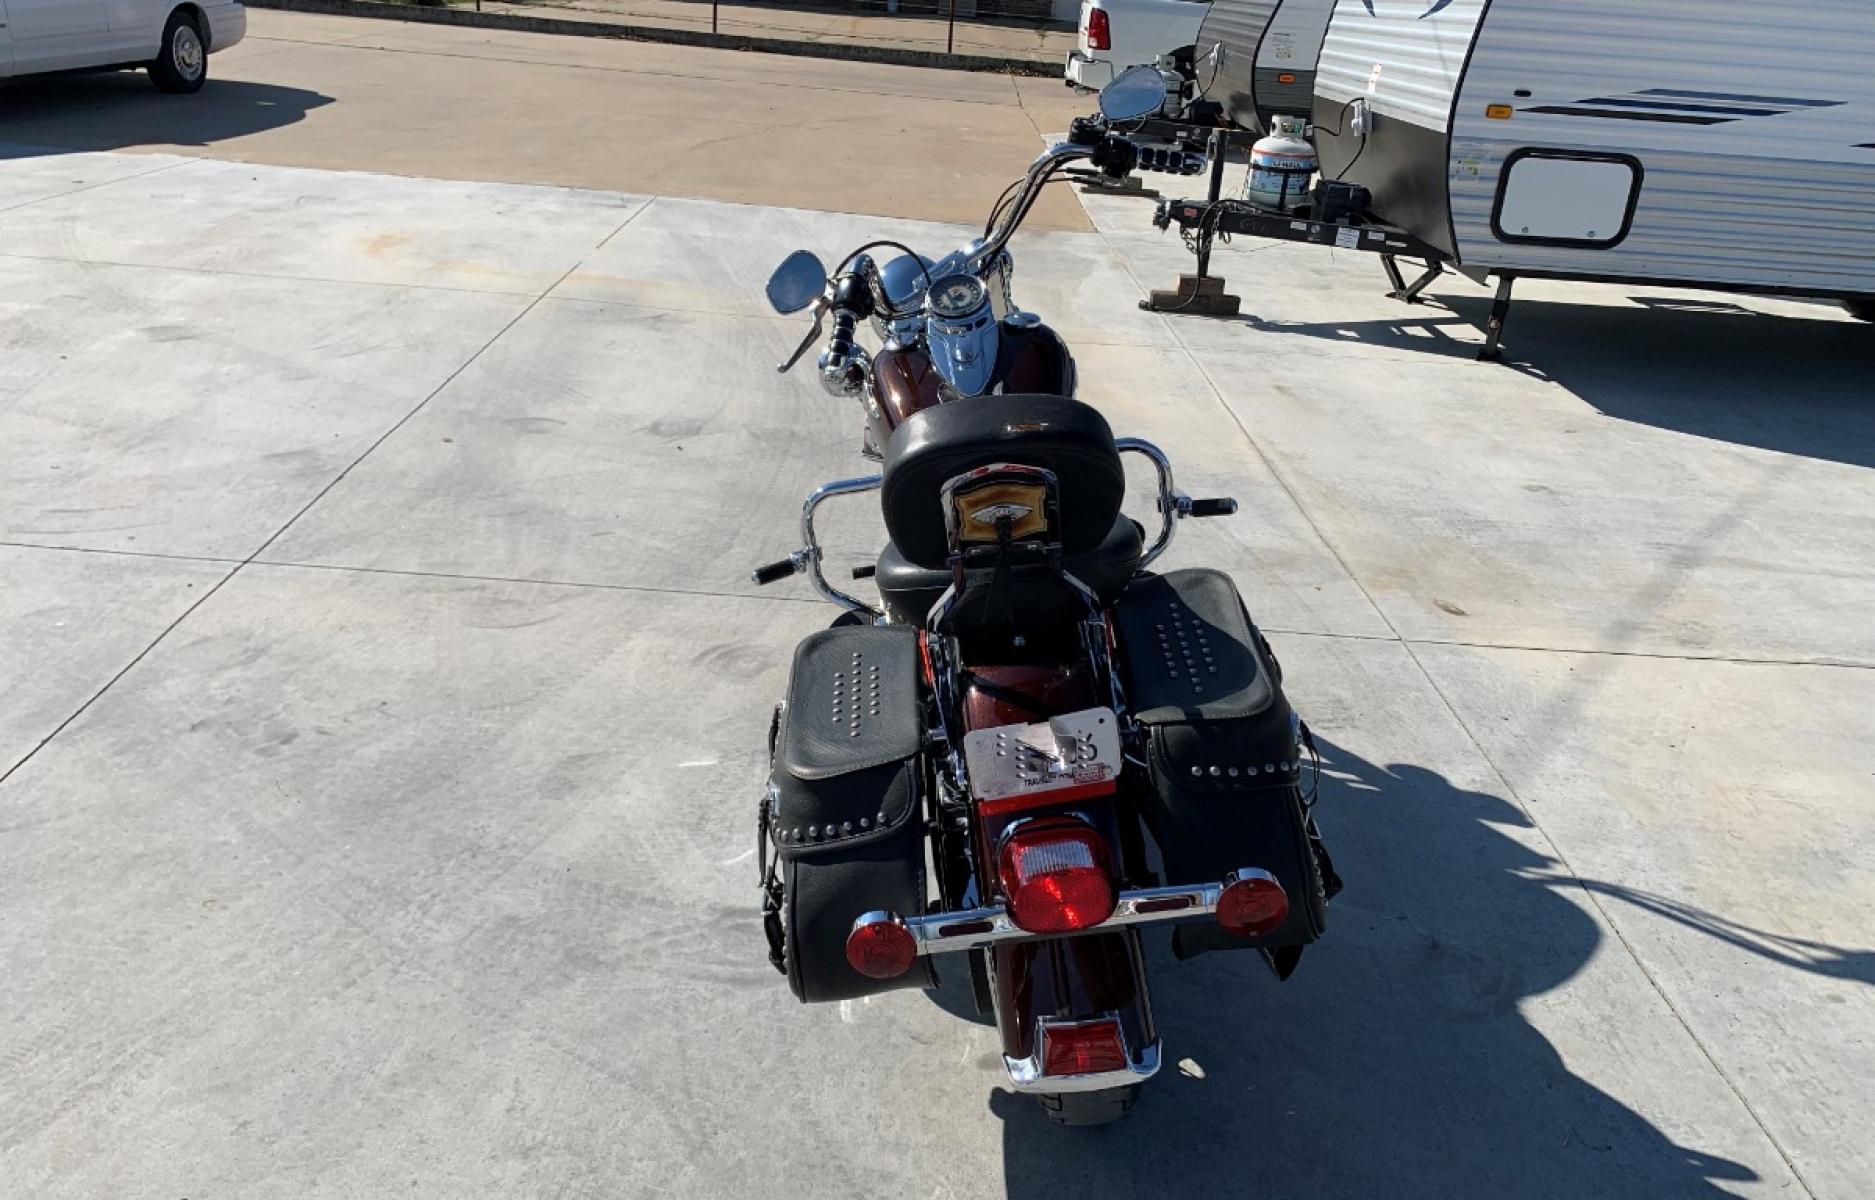 2009 PURPLE Harley-Davidson FLSTC - (1HD1BW5199Y) , located at 17760 HWY 62, MORRIS, 74445, 35.609104, -95.877060 - 2009 HARLEY- DAVIDSON FLSTC HERITAGE SOFTAIL 1584CC FEATURES CRUISE CONTROL, CHROME PASSING LAMPS, CHROME STAGGERED SHORTY EXHAUST WITH DUAL MUFFLERS, STUDDED LEATHER SADDLEBAGS, AND A FULL WINDSHIELD. A SMOOTH RIDE FOR LONG-RANGE TOURING COMFORT. IT RUNS GREAT !! ONLY 14,596 MILES. ** REBUILT TITLE - Photo #7